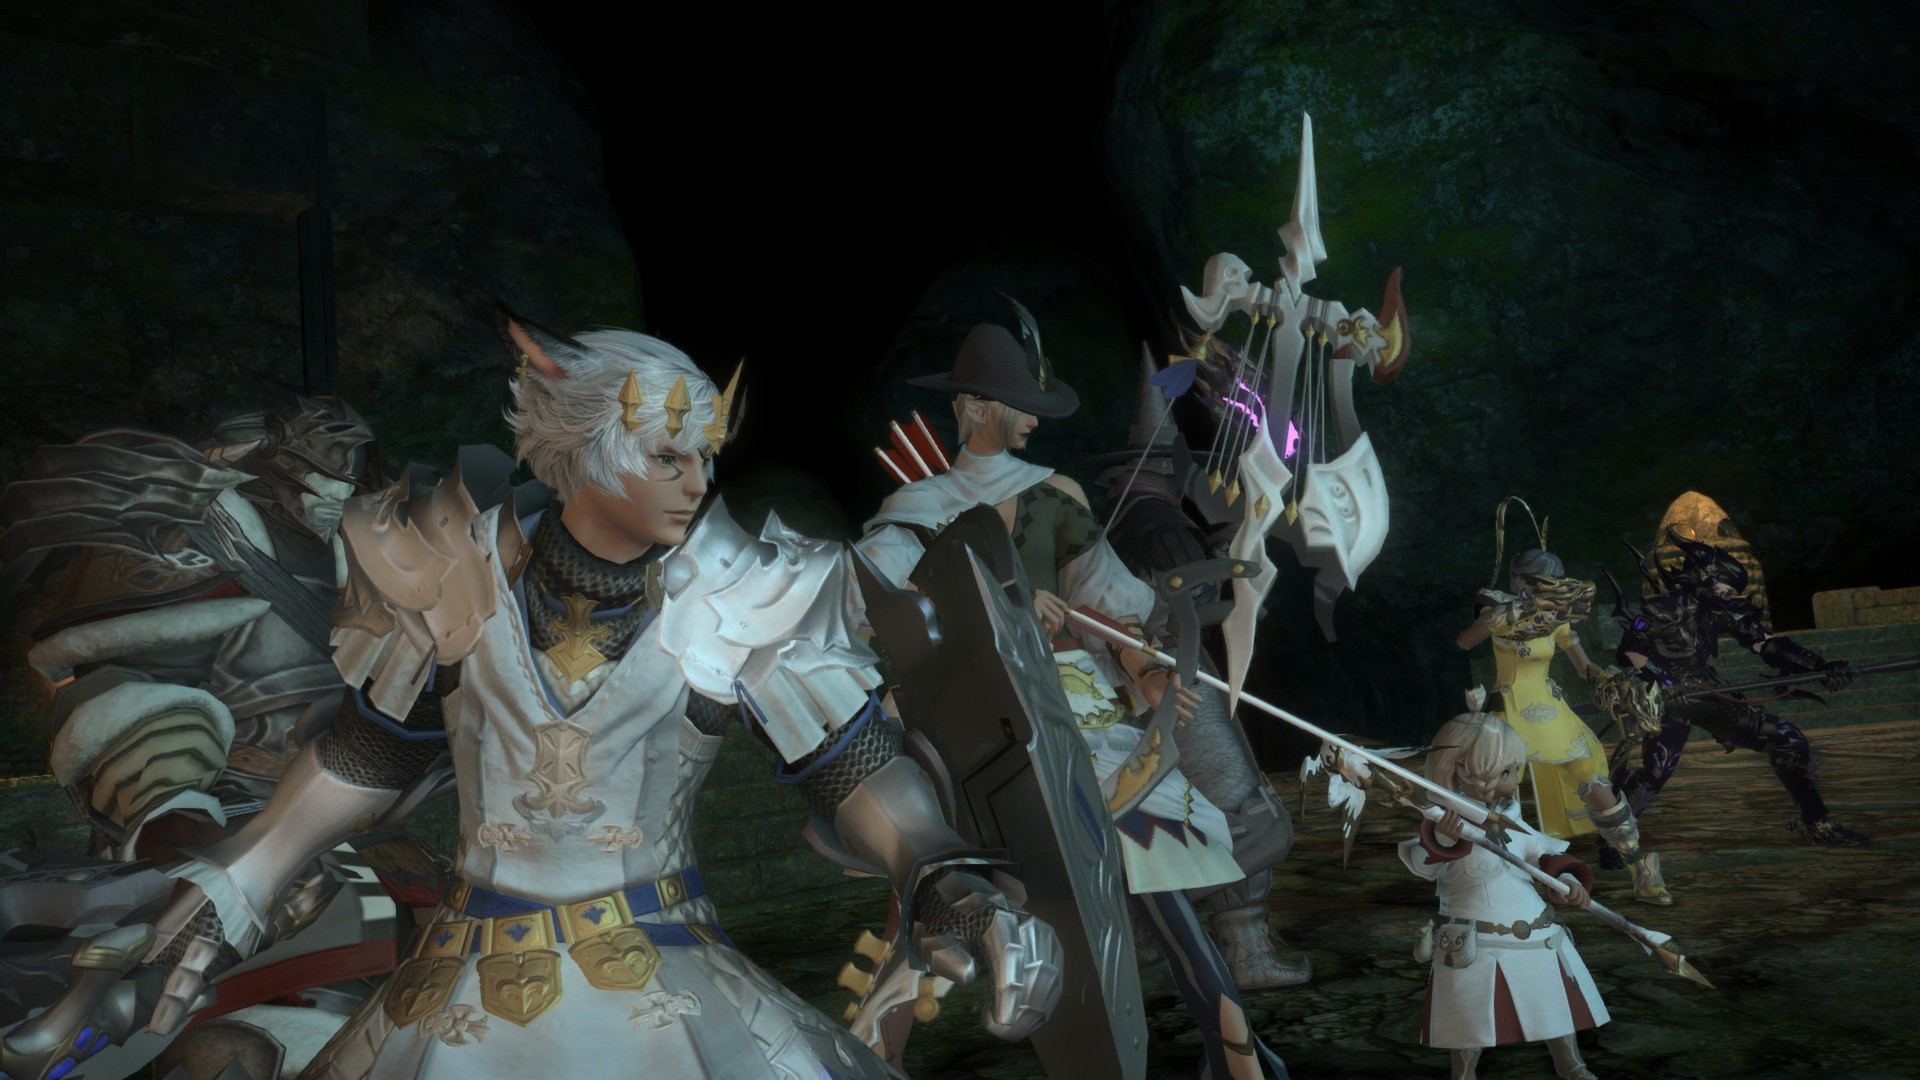 A team of FF14 charactrers ready to fight.